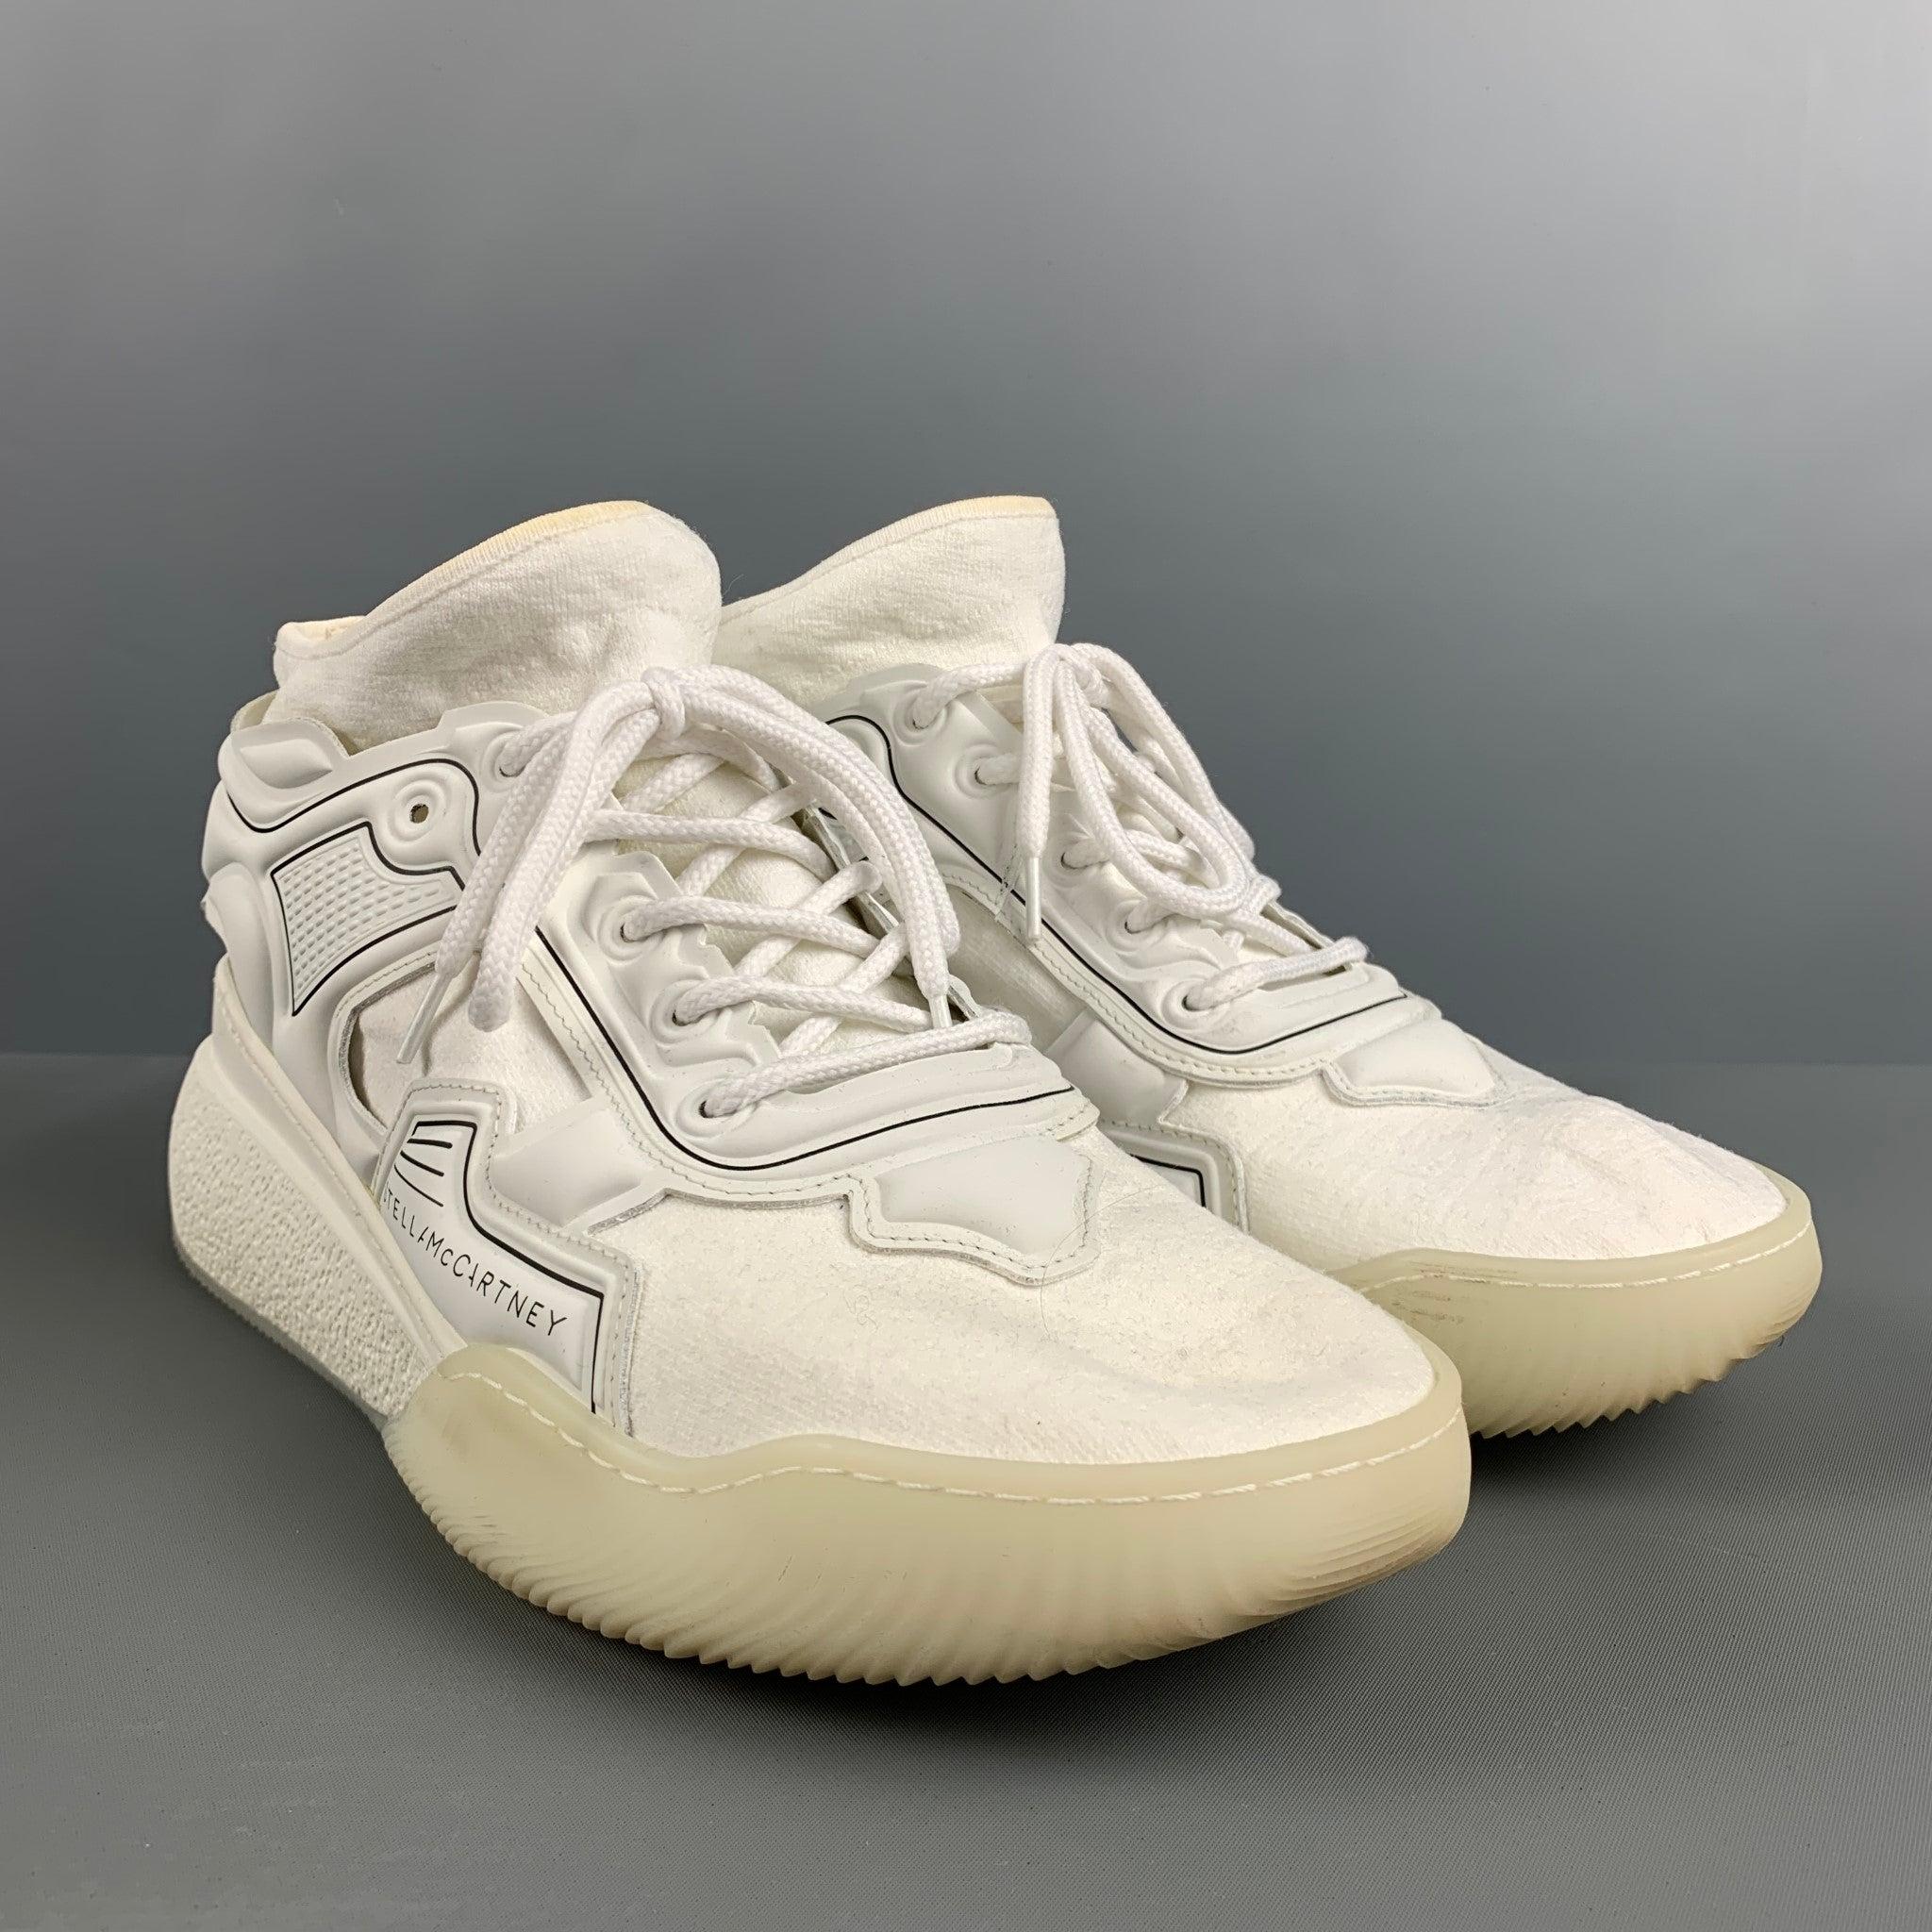 STELLA McCARTNEY ECLYPSE sneakers in a white knit material and rubber accents featuring a black contrast, high top style, chunky heel, and rubber sole. Made in Italy.Very Good Pre-Owned Condition. Minor signs of Wear. 

Marked:   44Outsole:13 inches